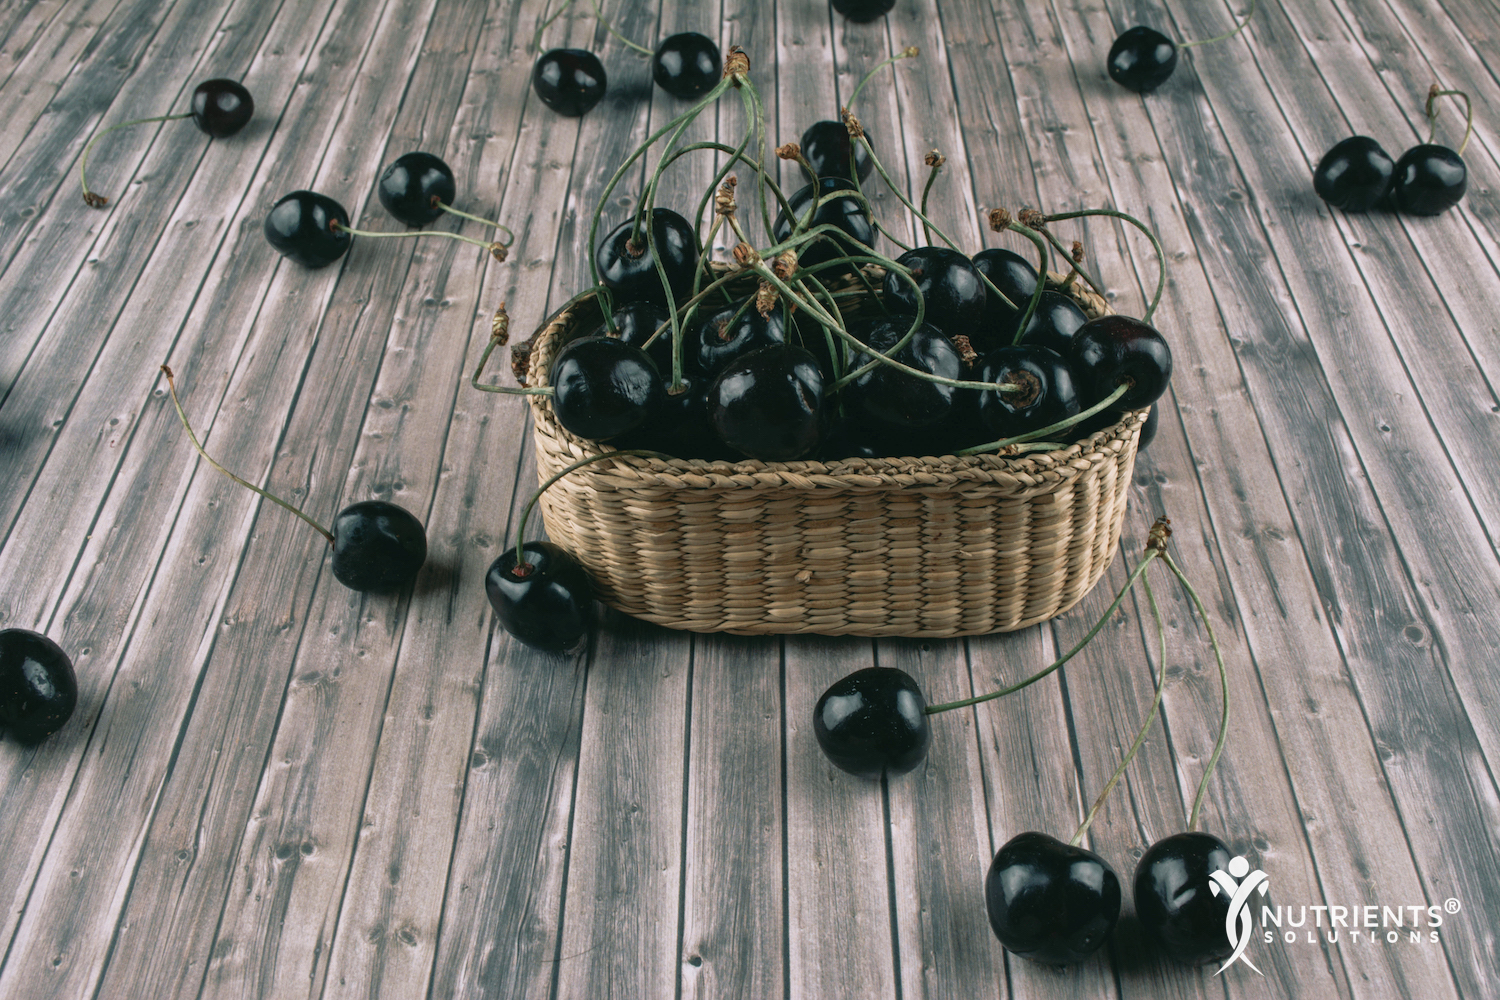 9 Black Cherry Benefits: How the Plant Pigment in Black Cherries Fights Aging and Disease 